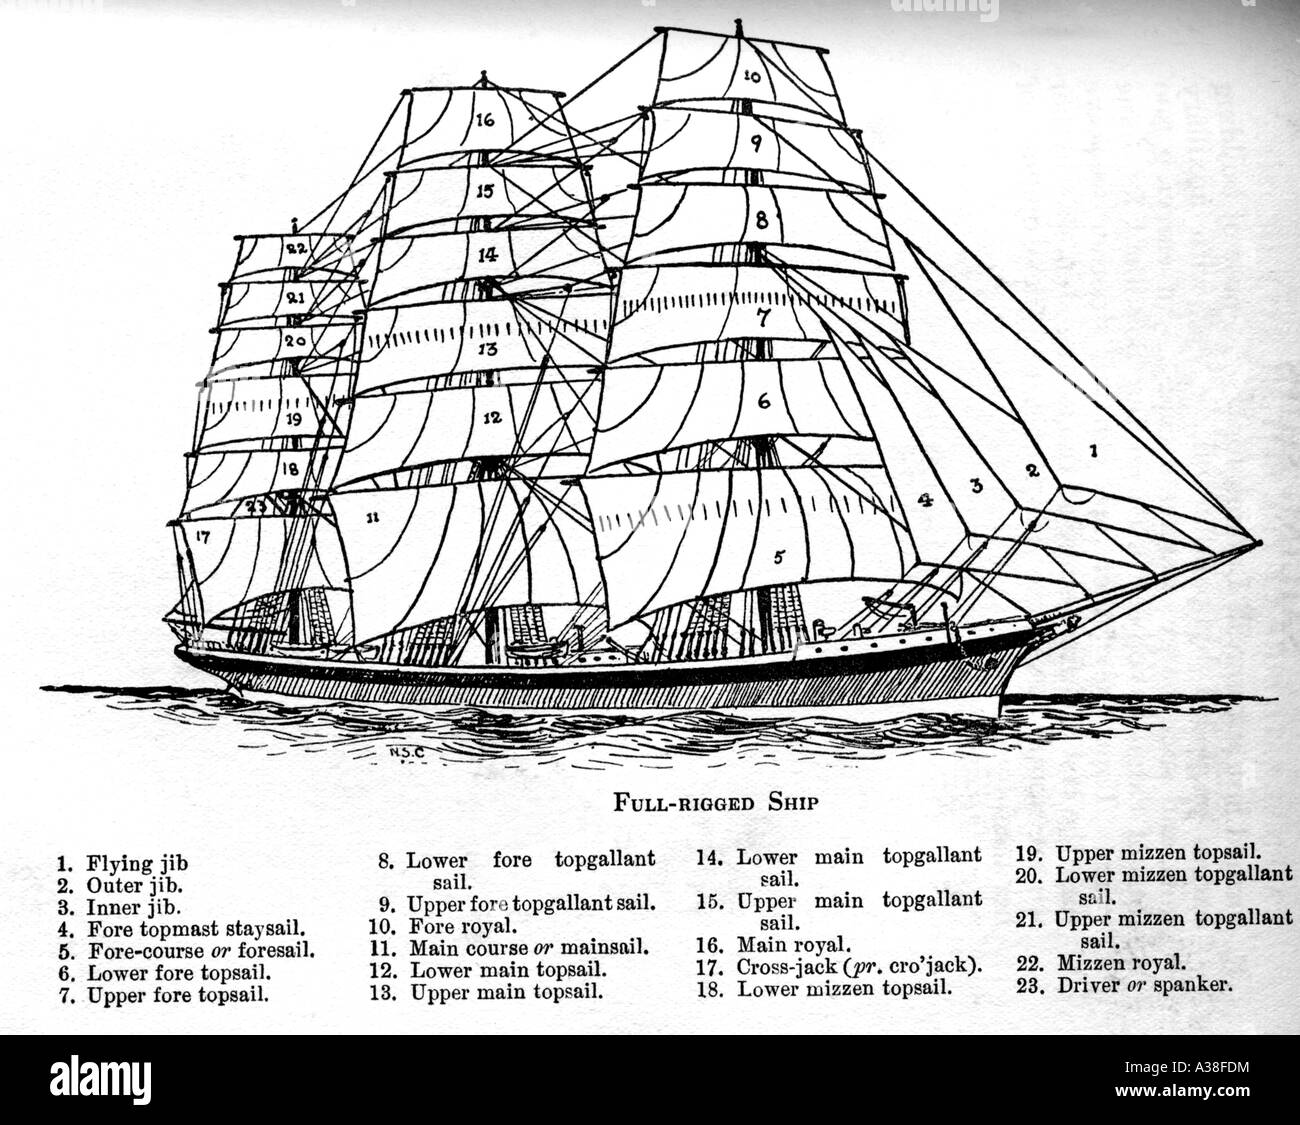 Full-rigged 19th-century ship The labels on this full-rigged ship diagram are: 1. flying jib, 2. outer jib, 3. inner jib, 4. fore topmast staysail, 5. Stock Photo